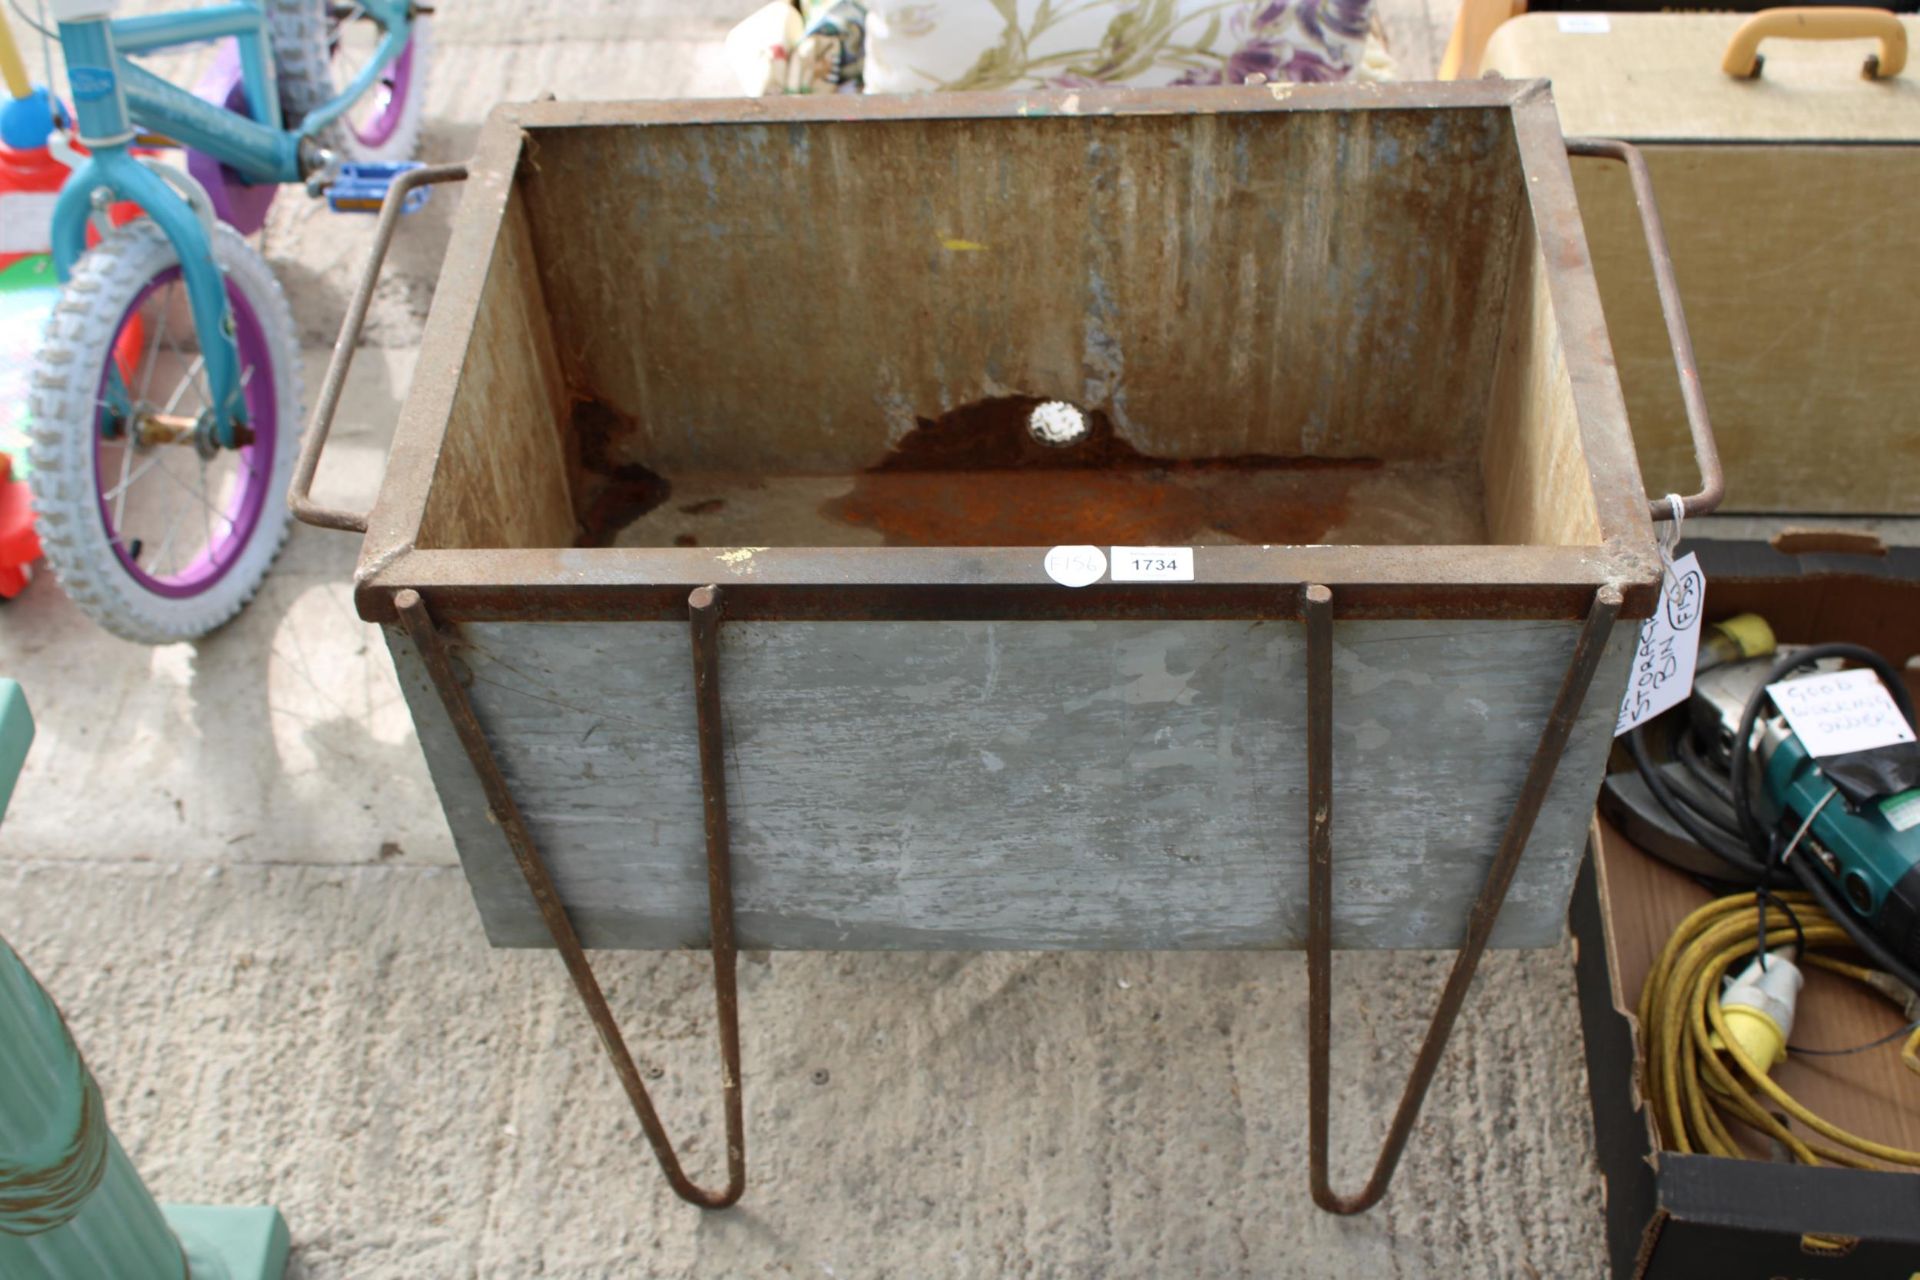 A METAL STORAGE BOX/TROUGH PLANTER WITH STAND